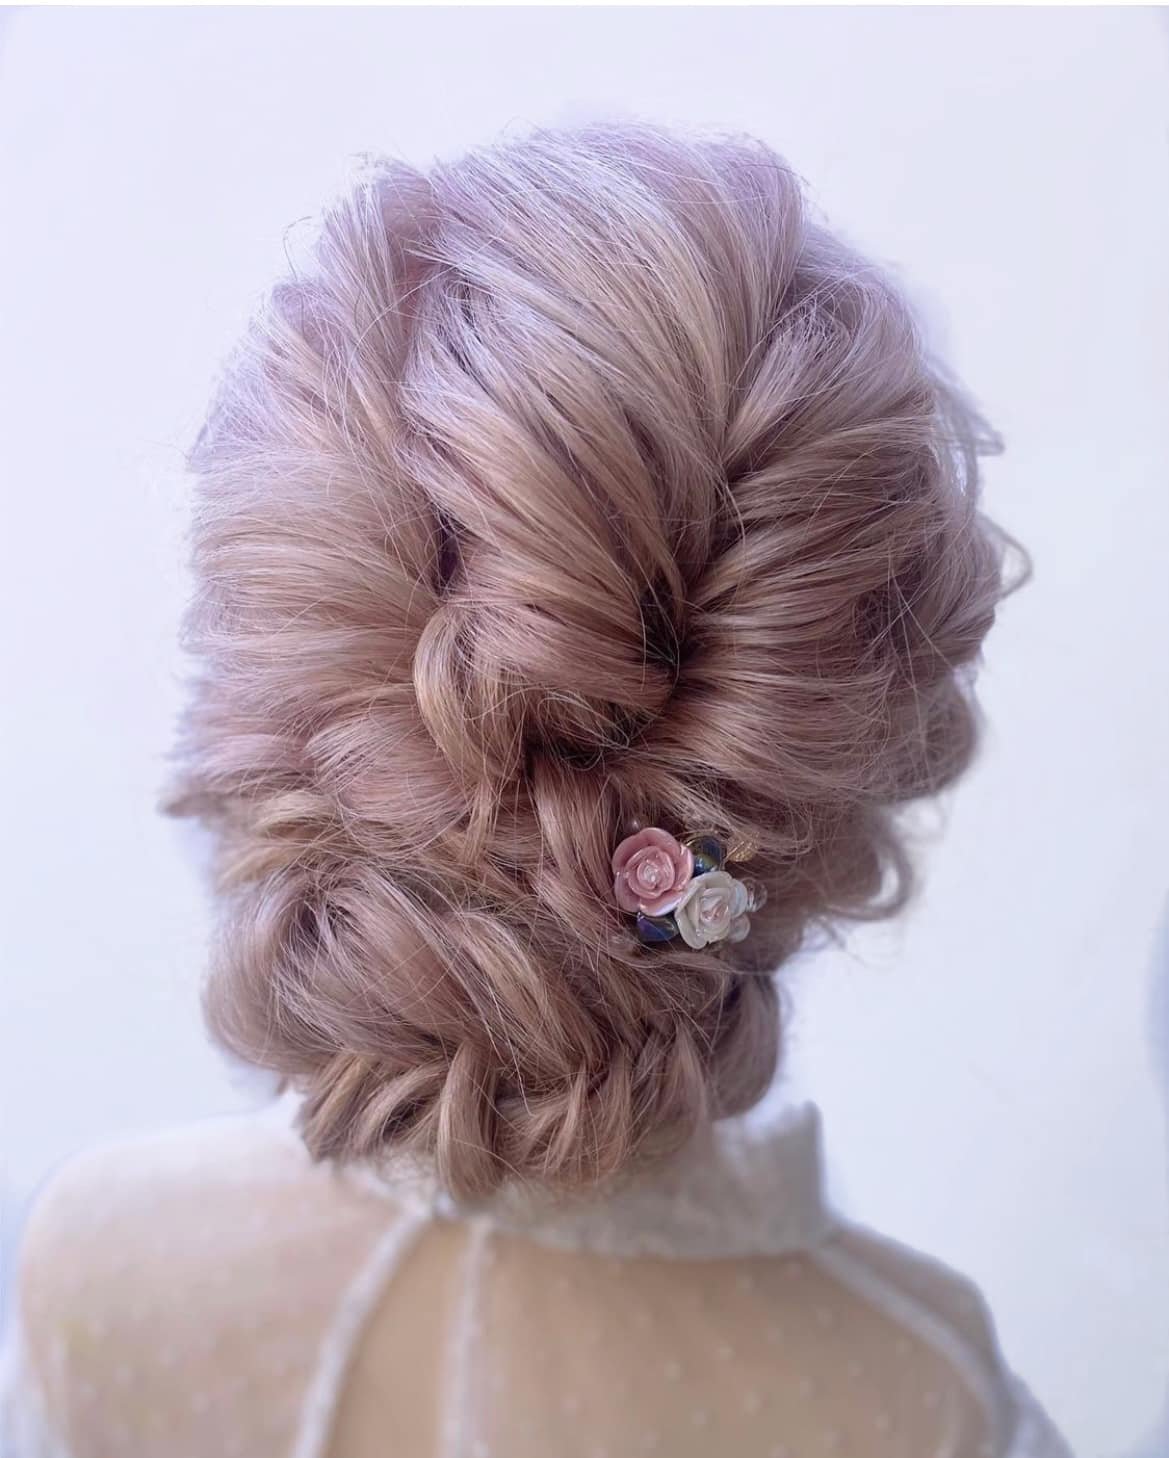 39 Gorgeous Bridesmaid Hairstyles for The Brides Big Day